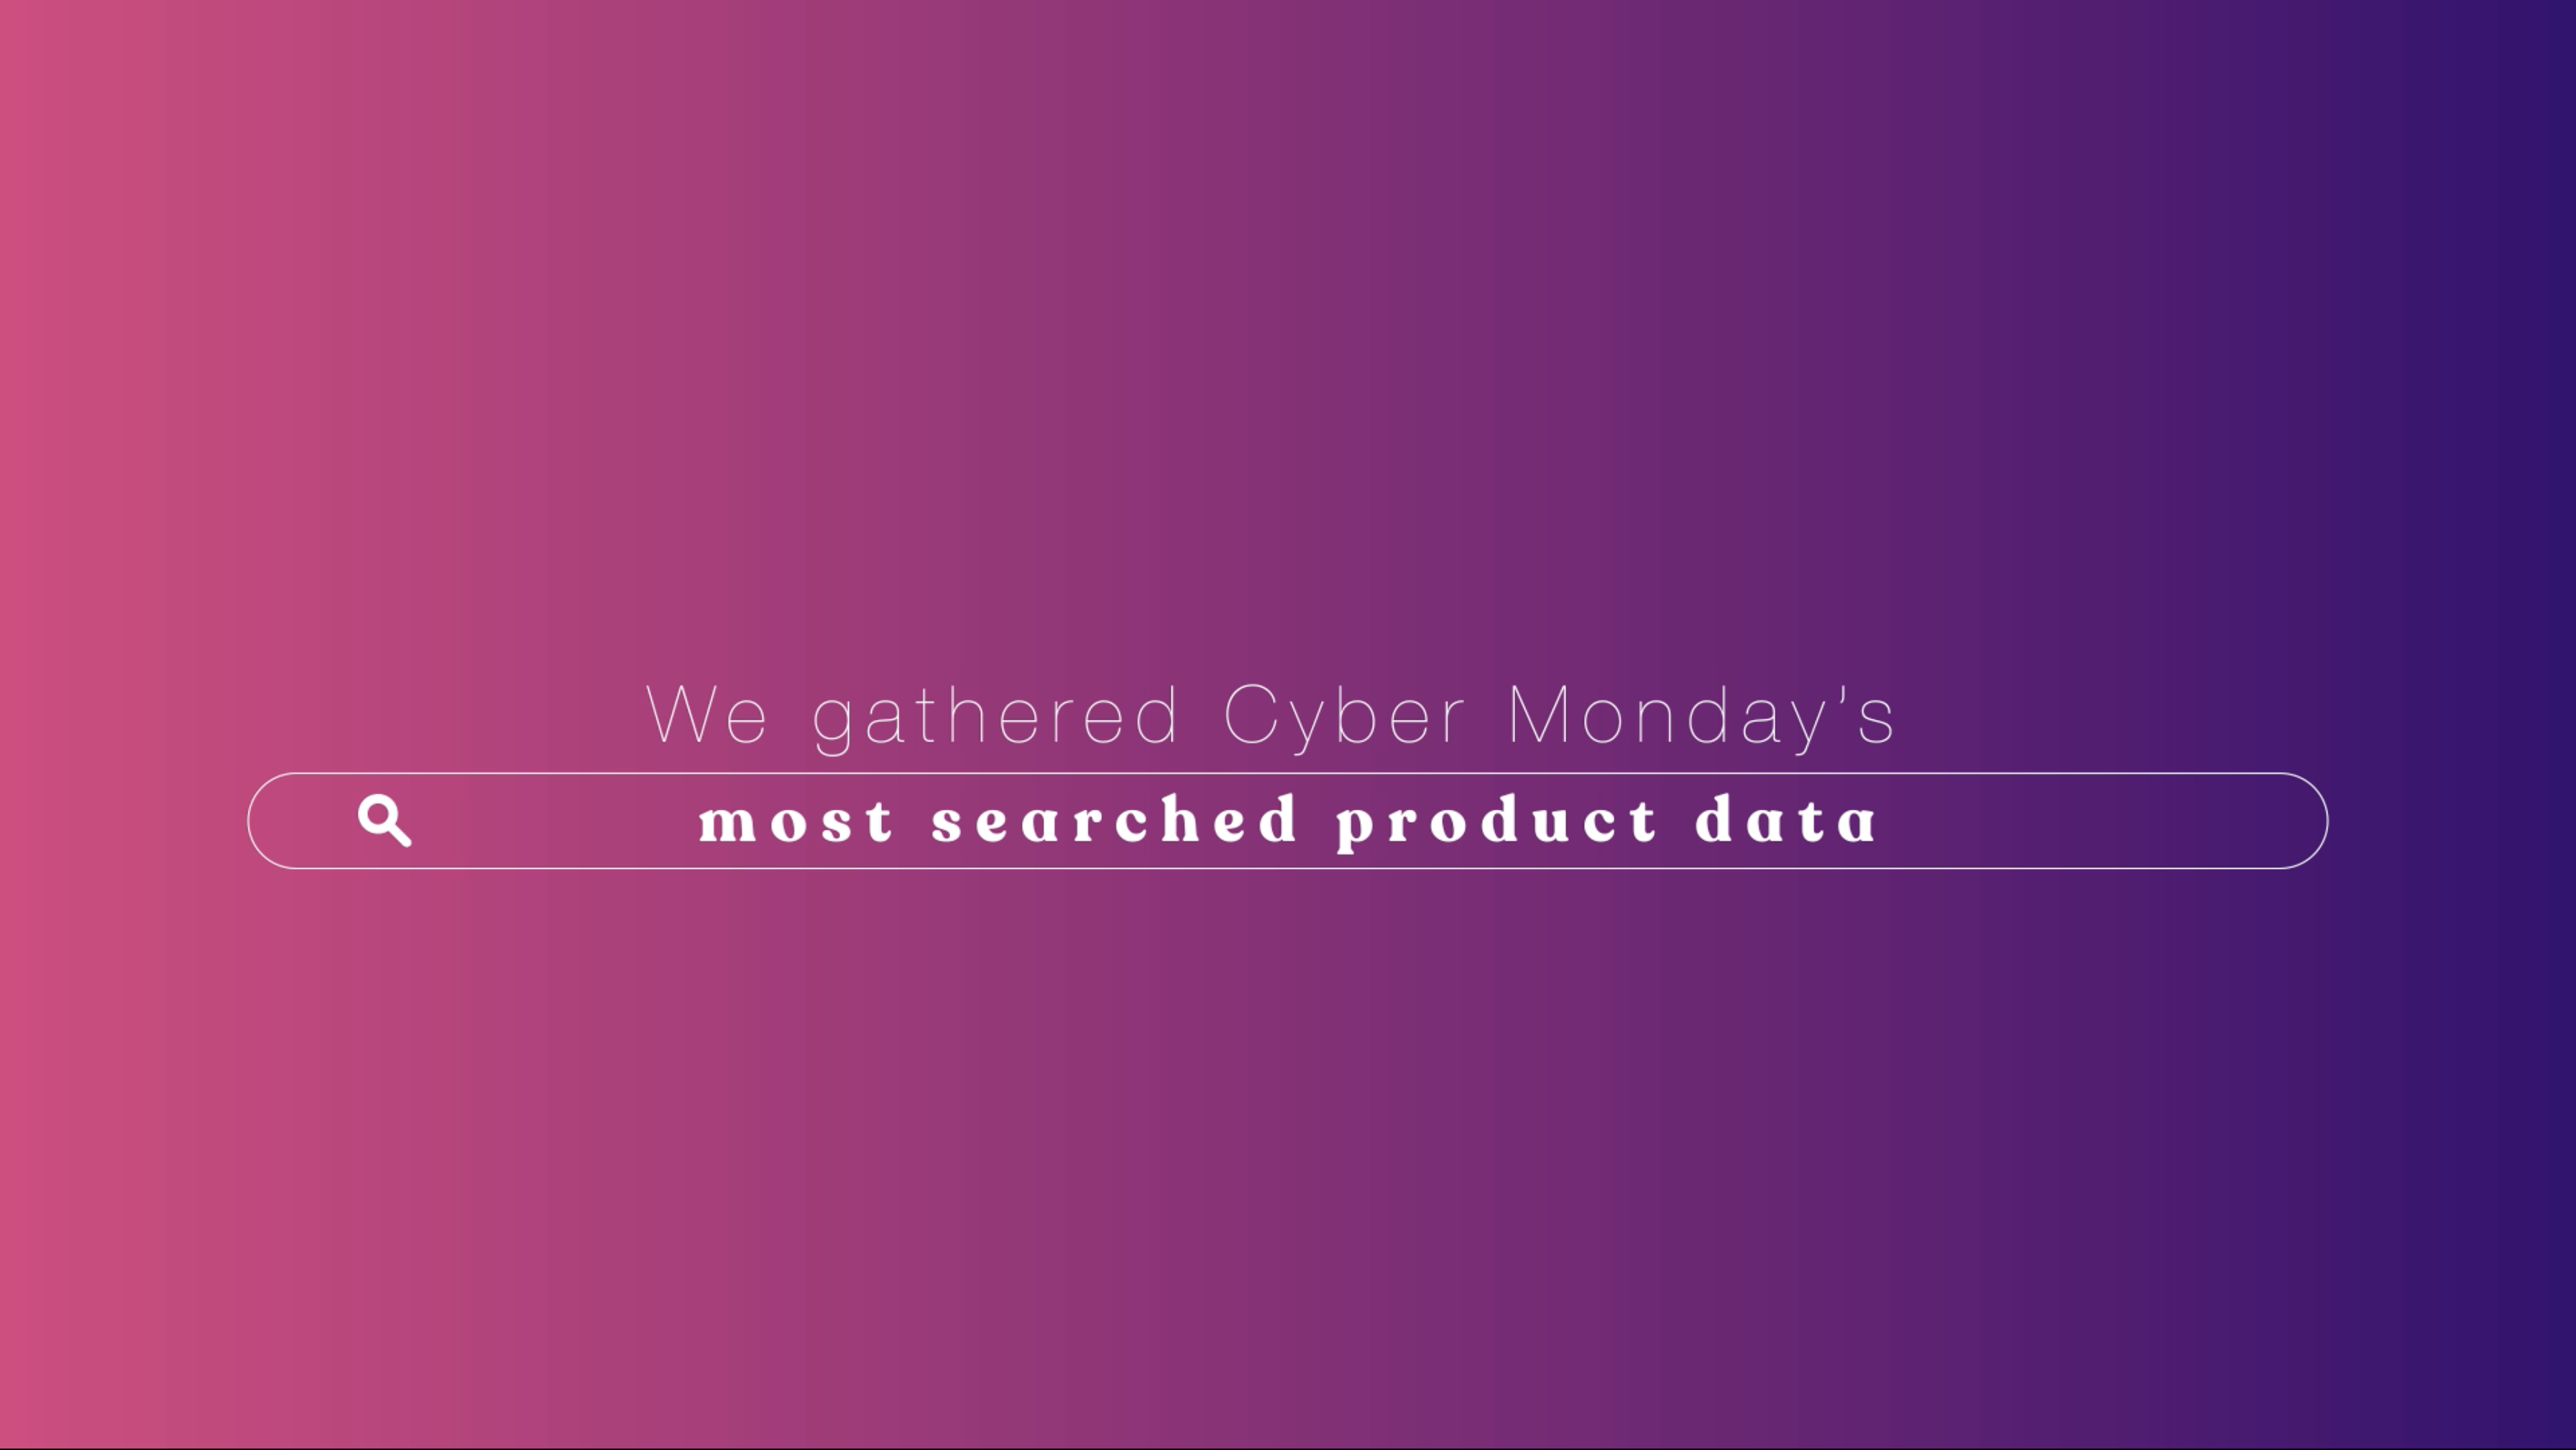 An unparalleled Cyber Monday experience